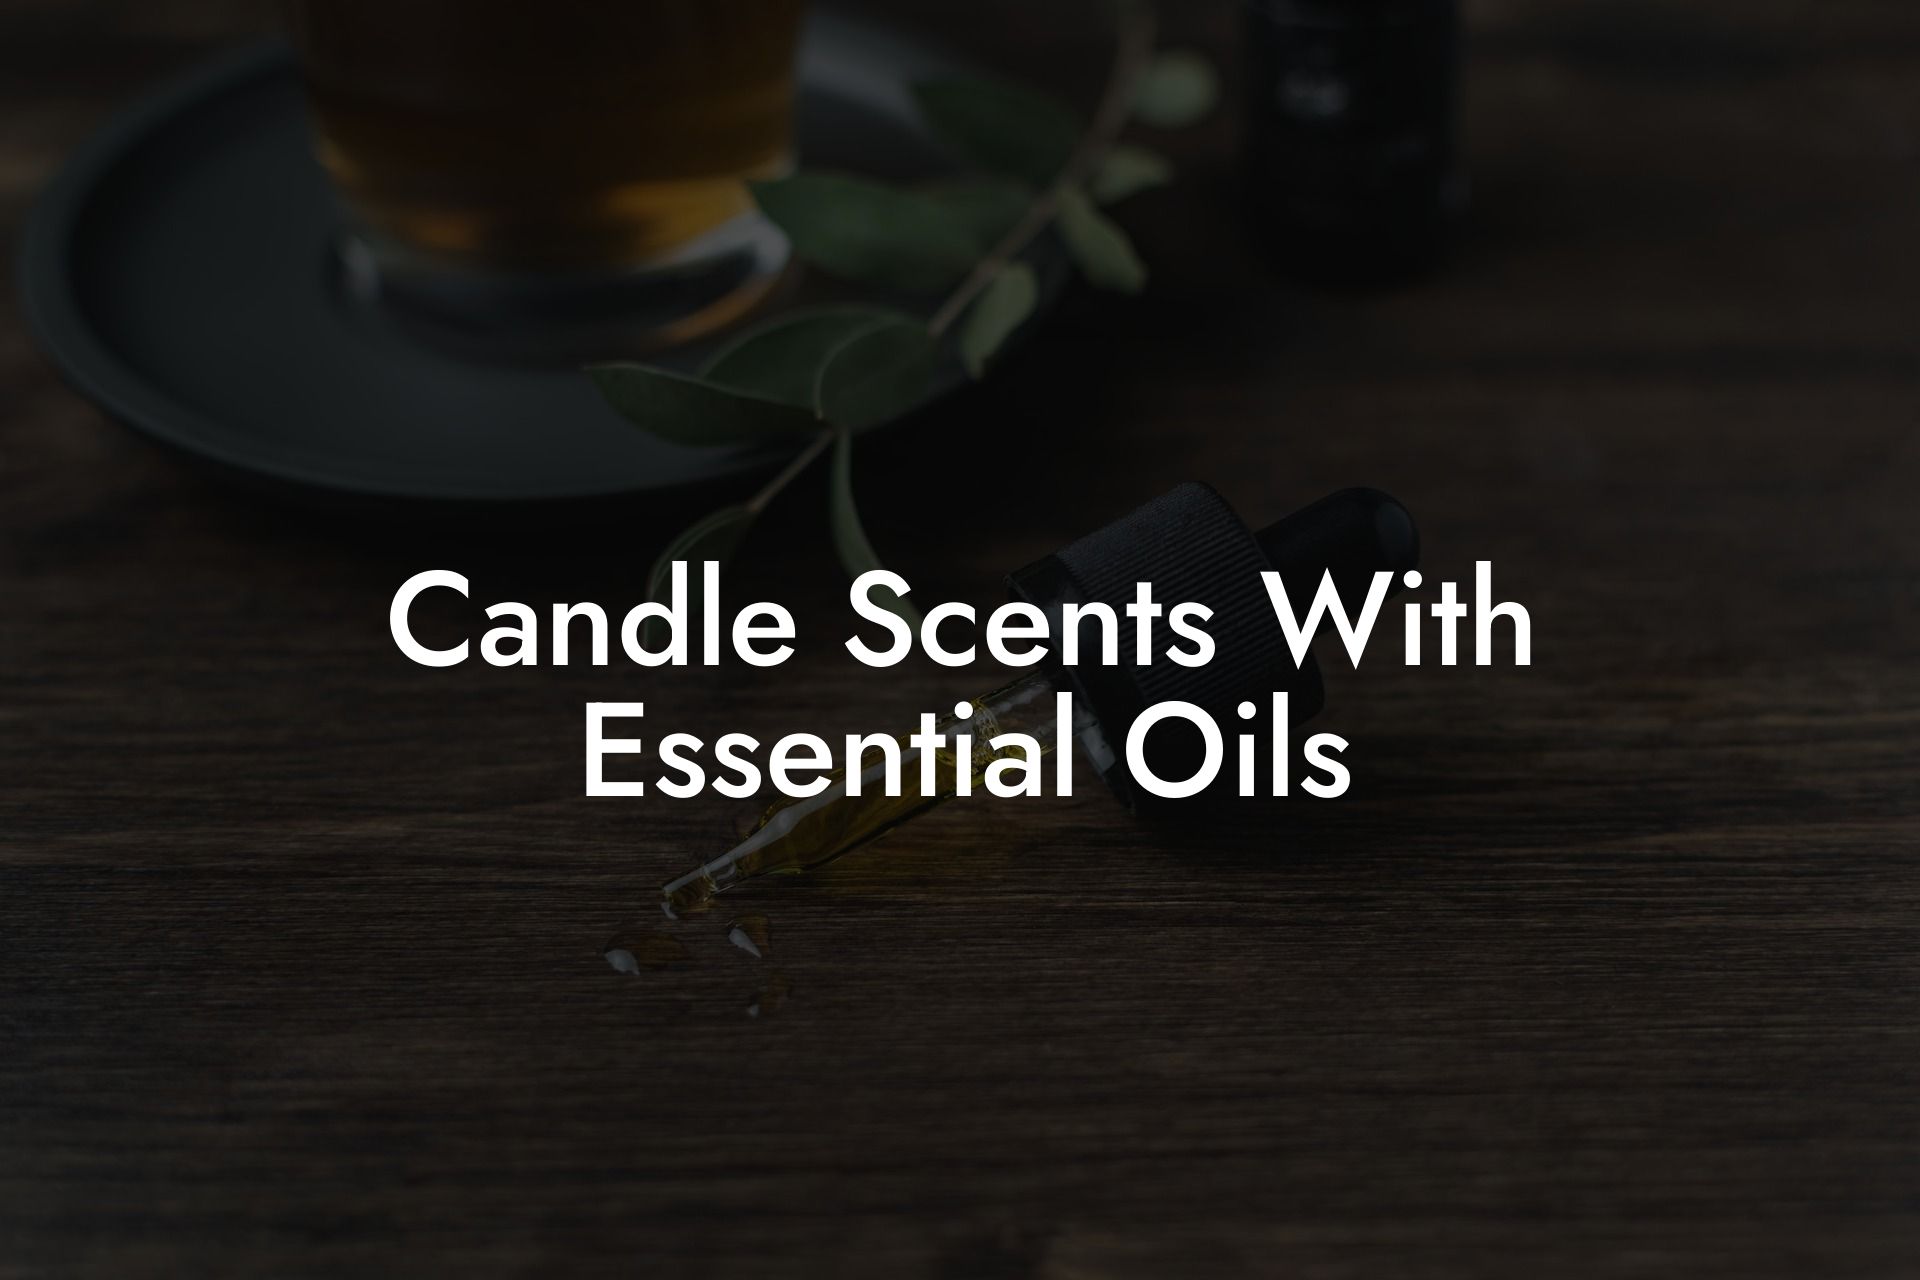 Candle Scents With Essential Oils